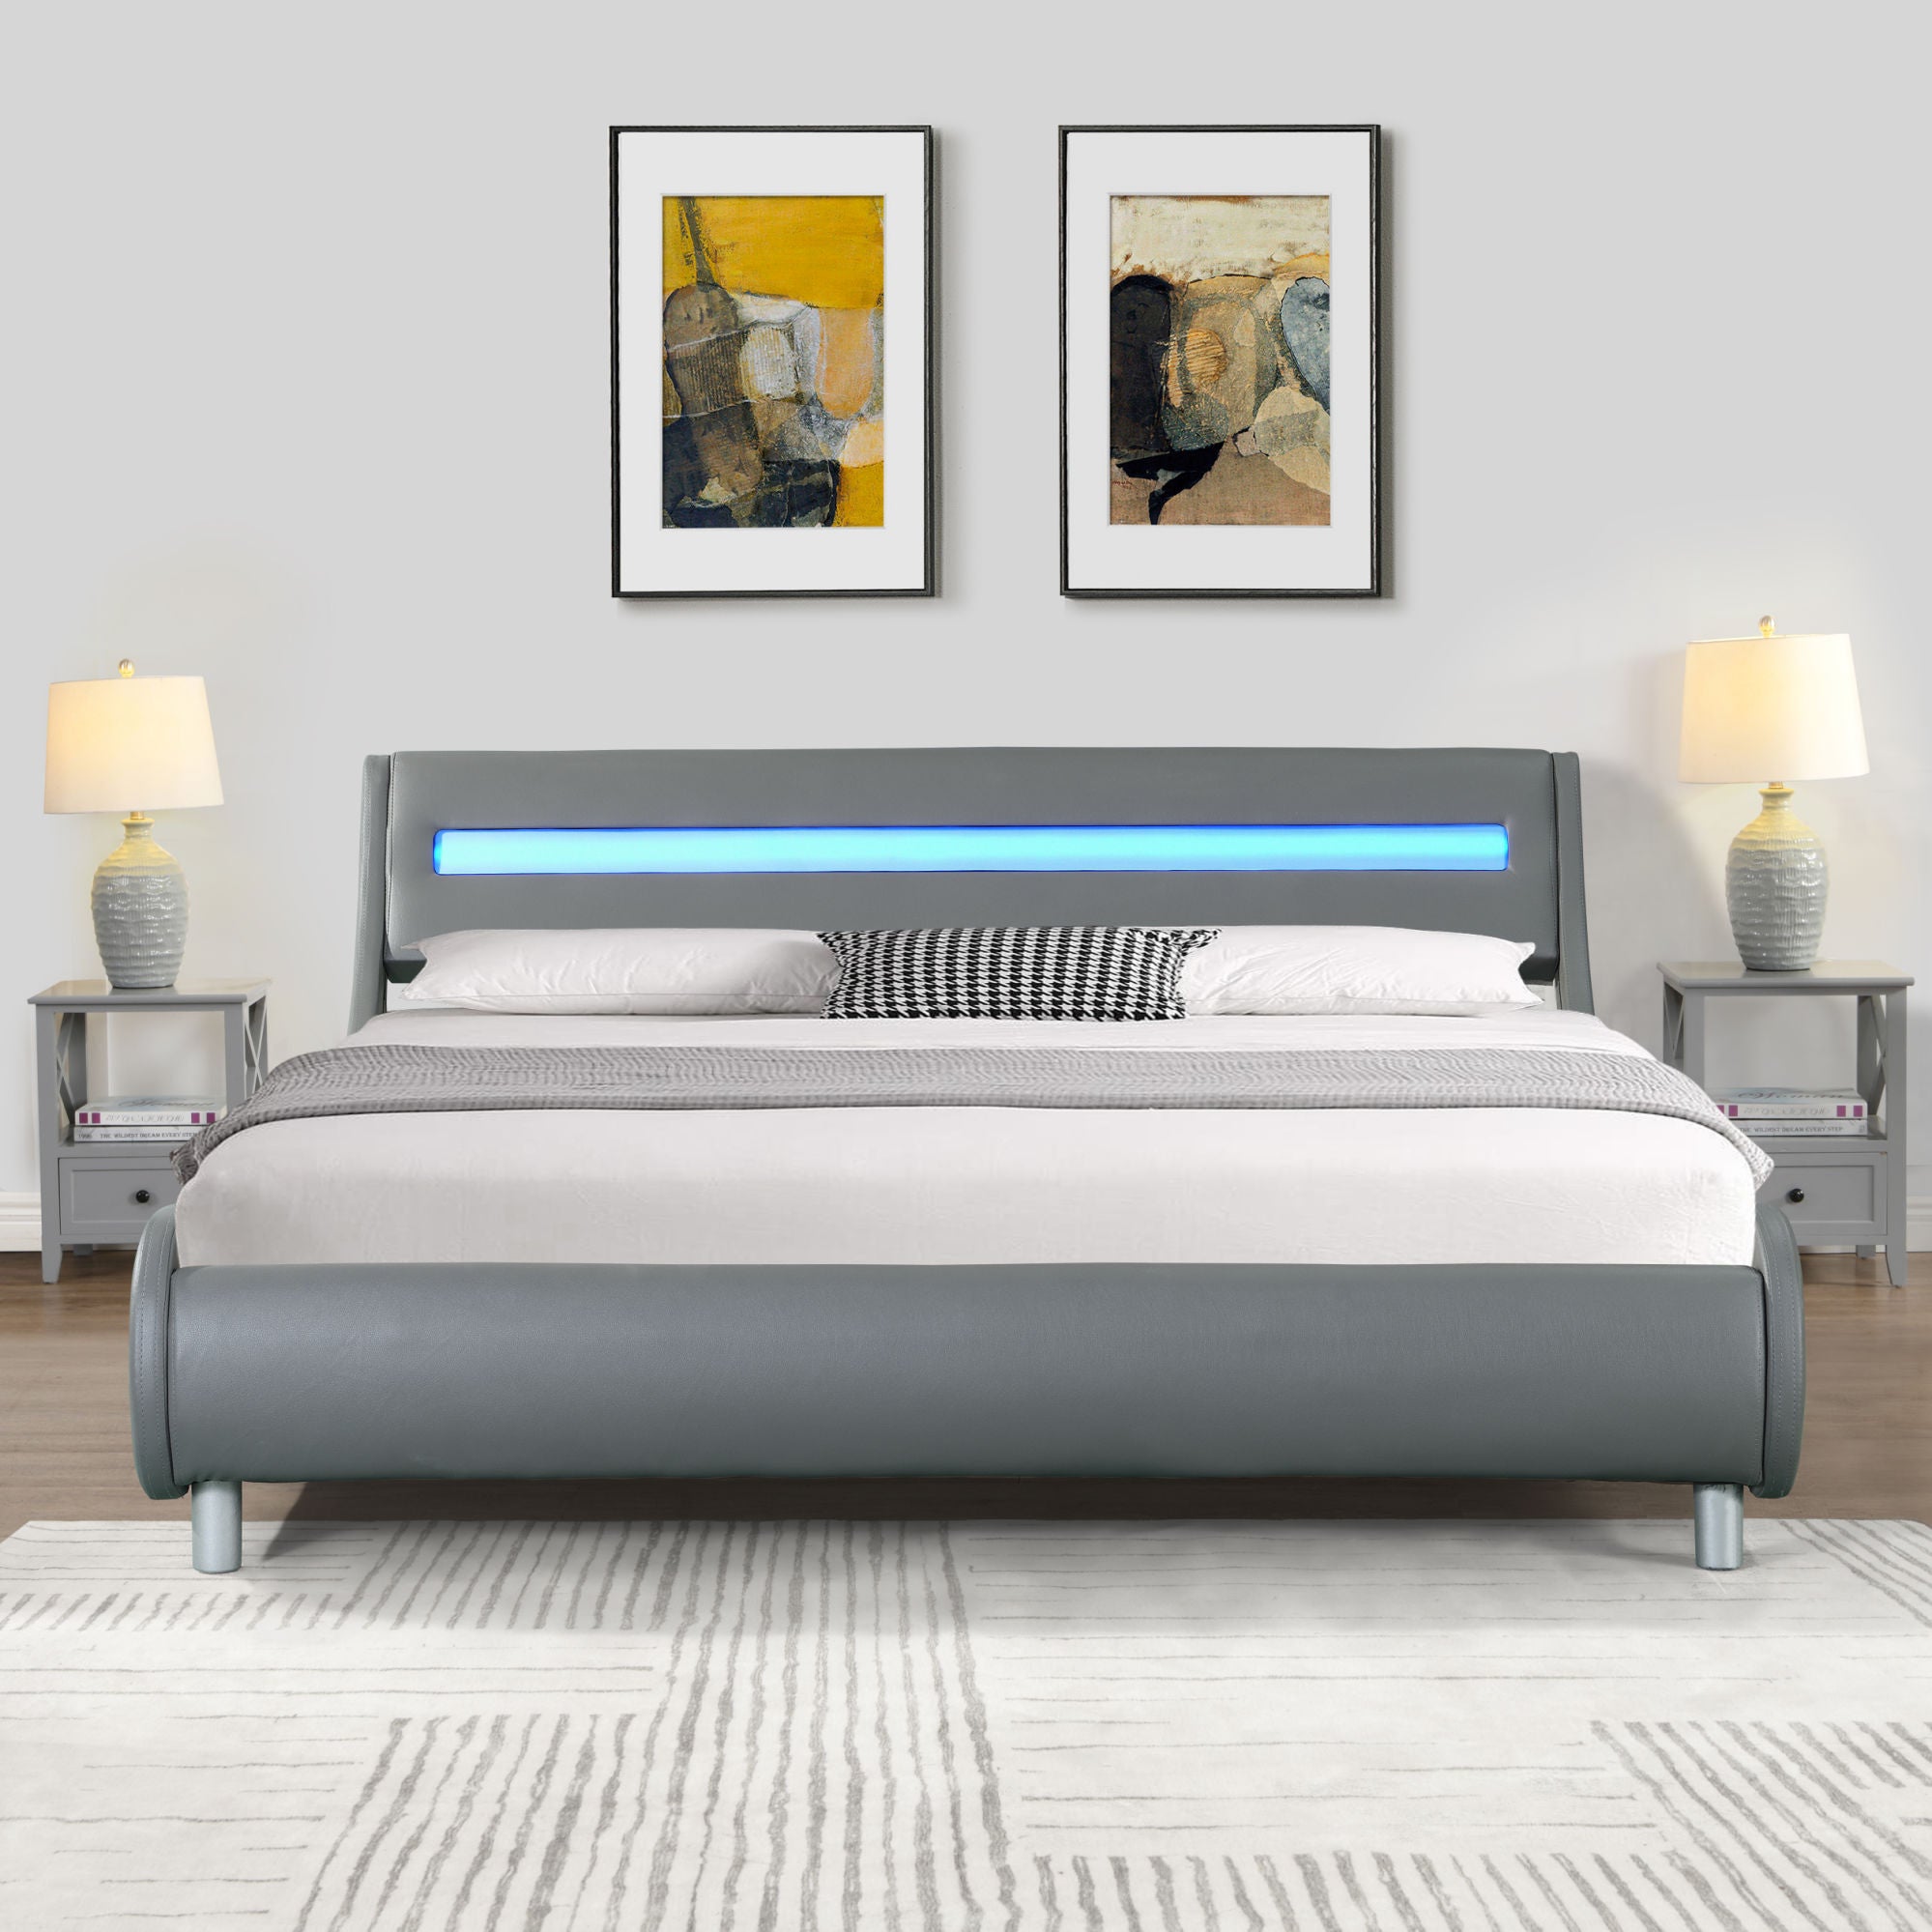 Faux Leather Upholstered Platform Bed Frame with led lighting , Curve Design, Wood Slat Support, No Box Spring Needed, Easy Assemble, Queen Size